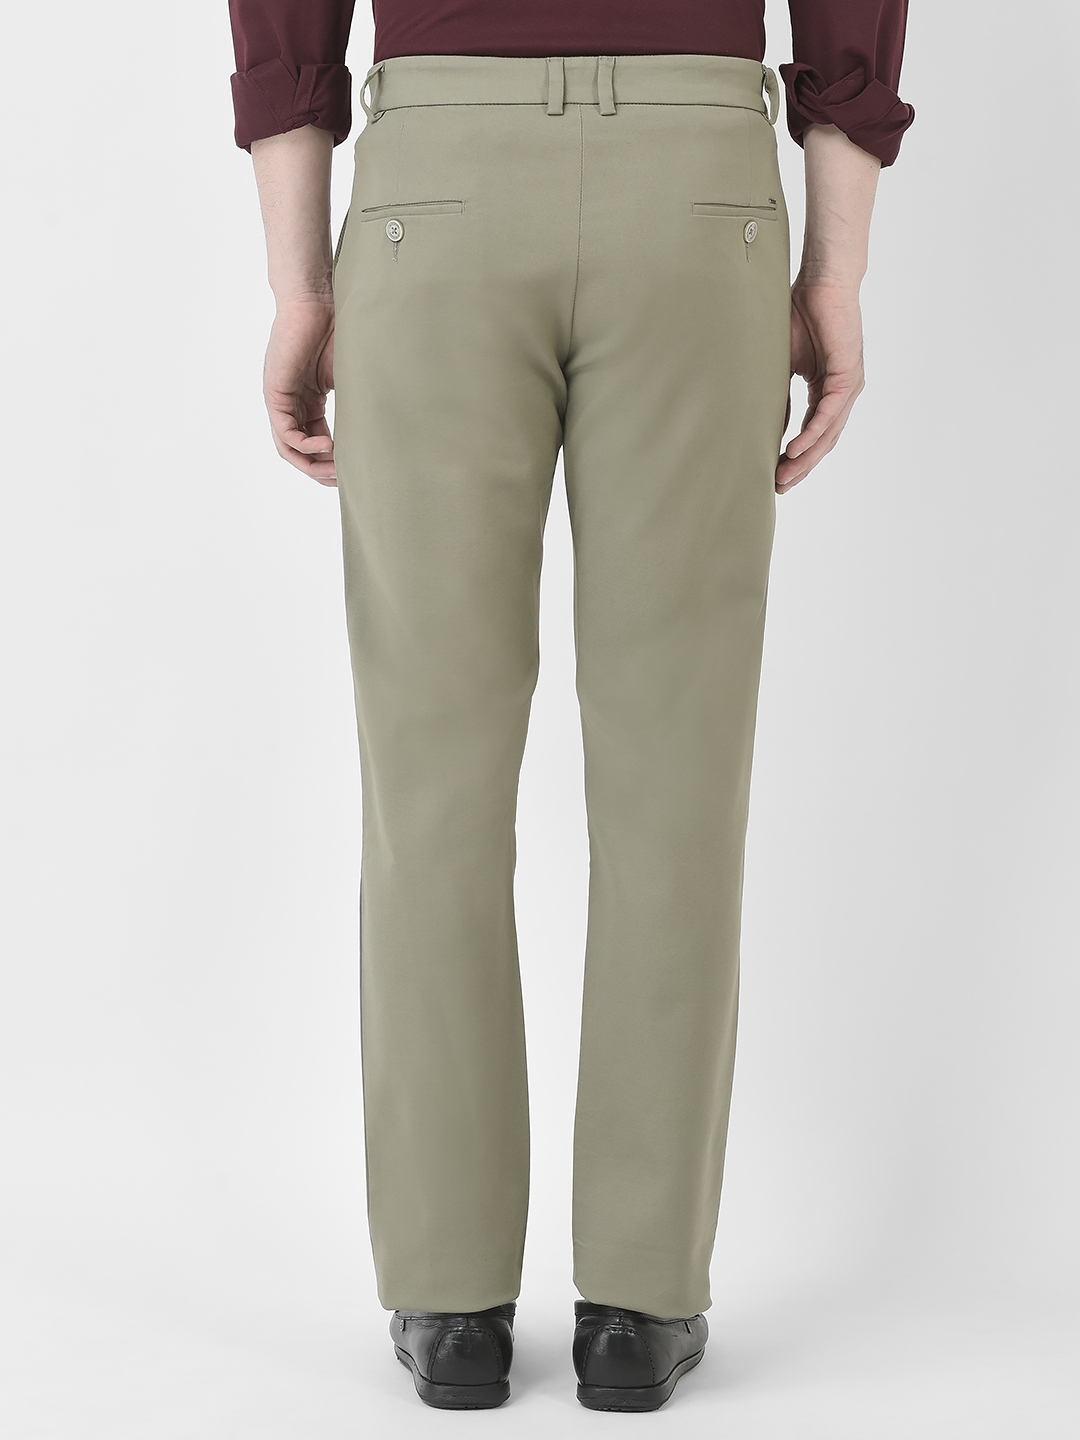 Globus Trousers and Pants : Buy Globus Black Solid Slim Fit Regular Trousers  Online | Nykaa Fashion